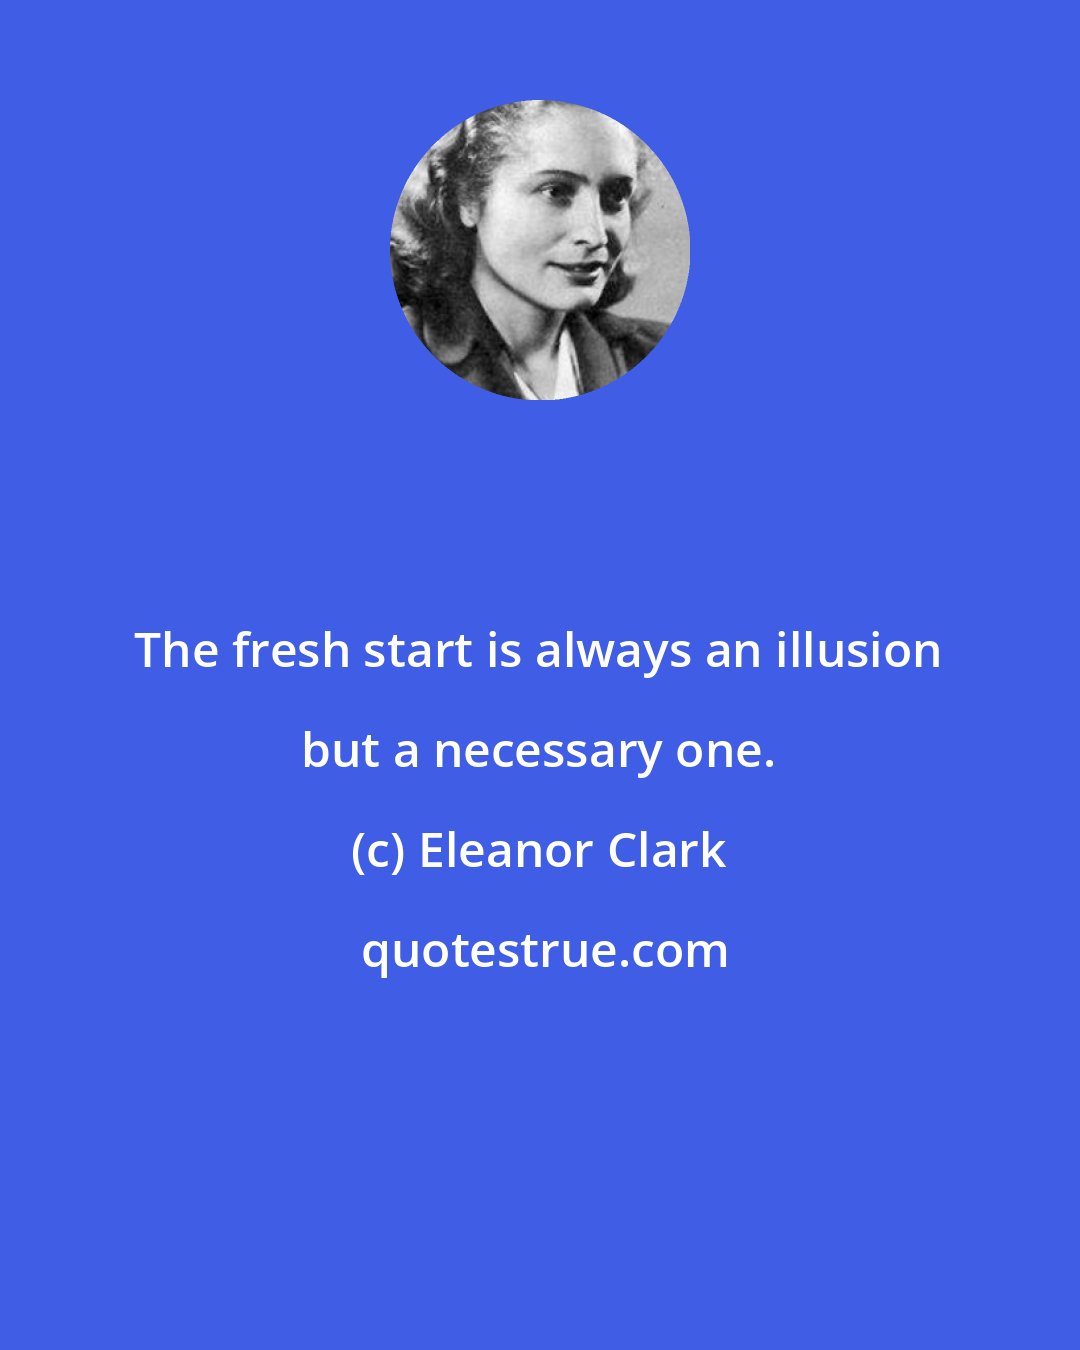 Eleanor Clark: The fresh start is always an illusion but a necessary one.